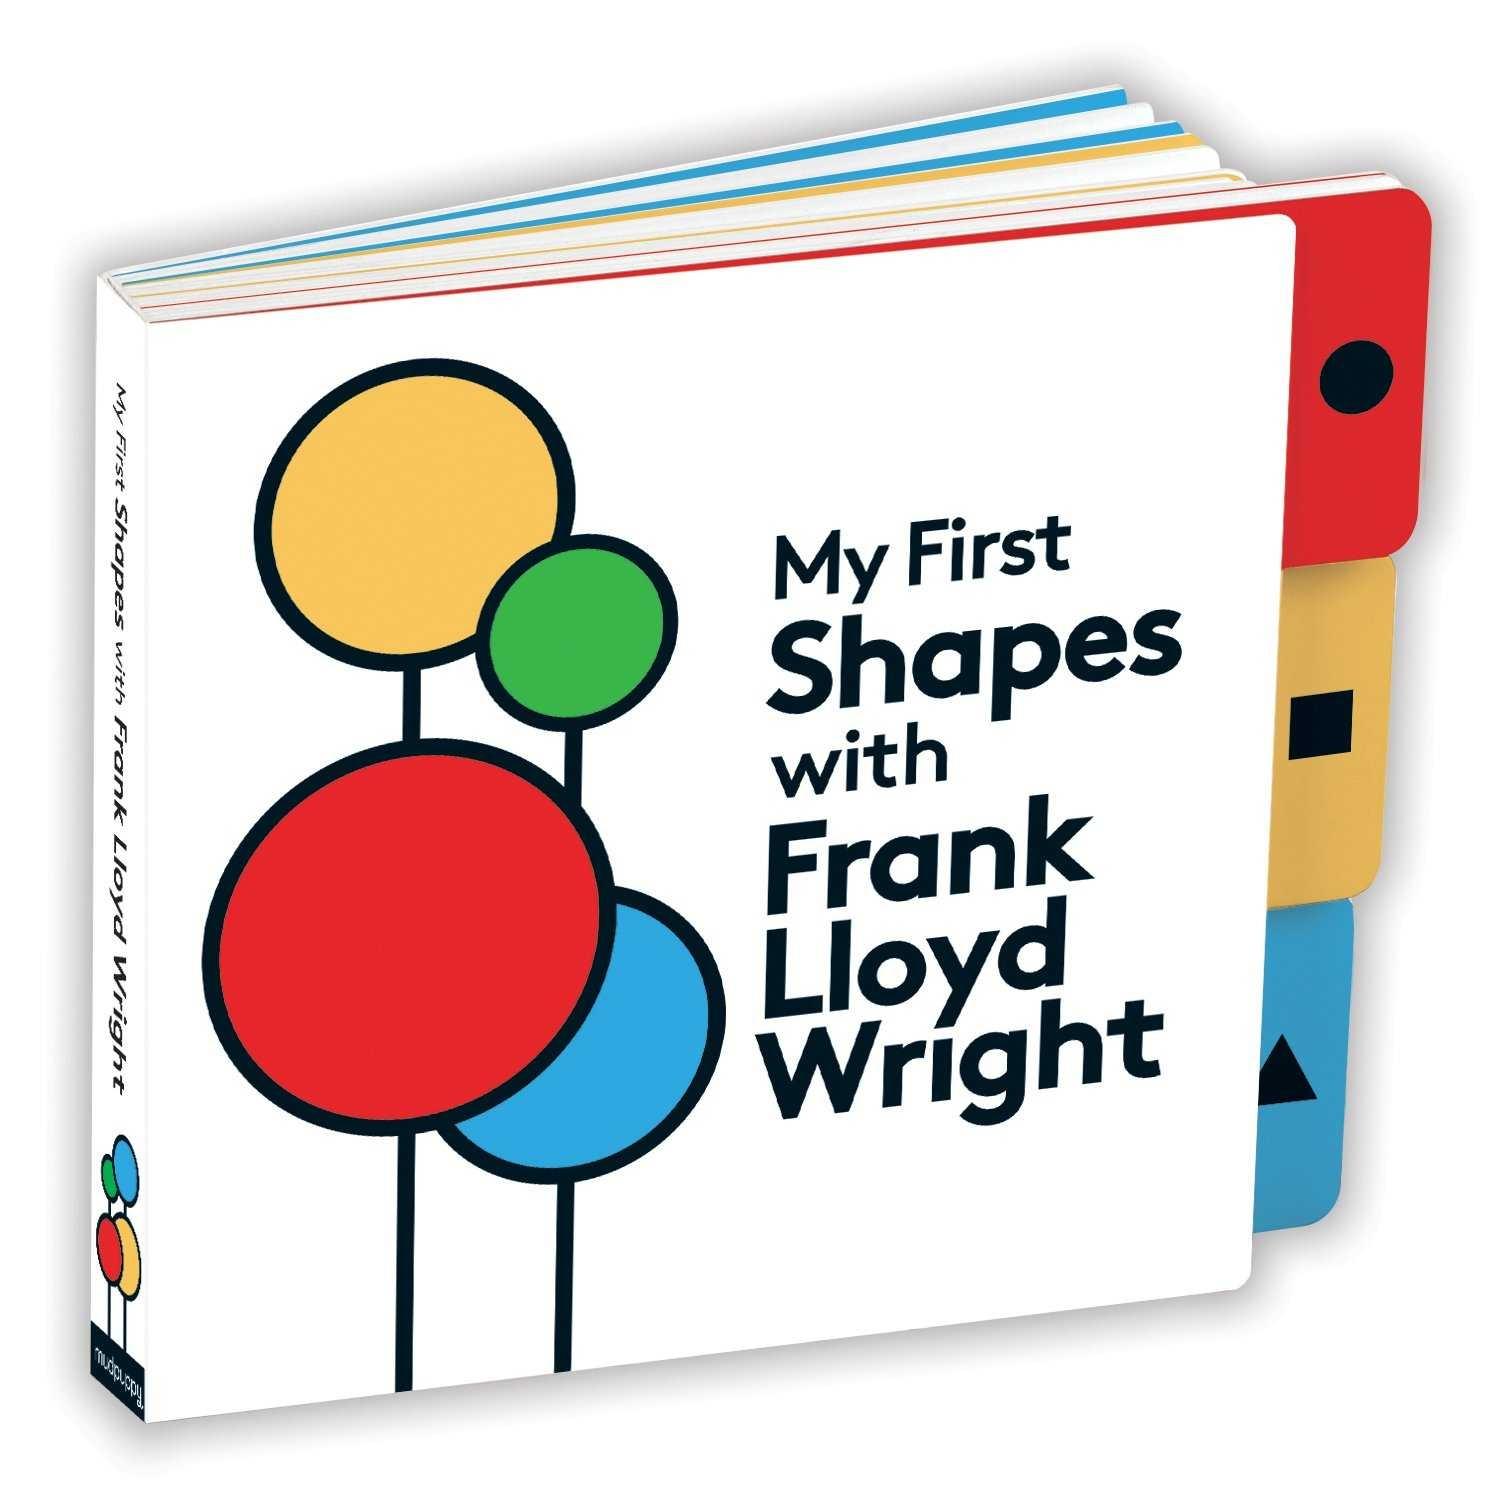 FIRST SHAPES WITH FRANK LLOYD WRIGHT